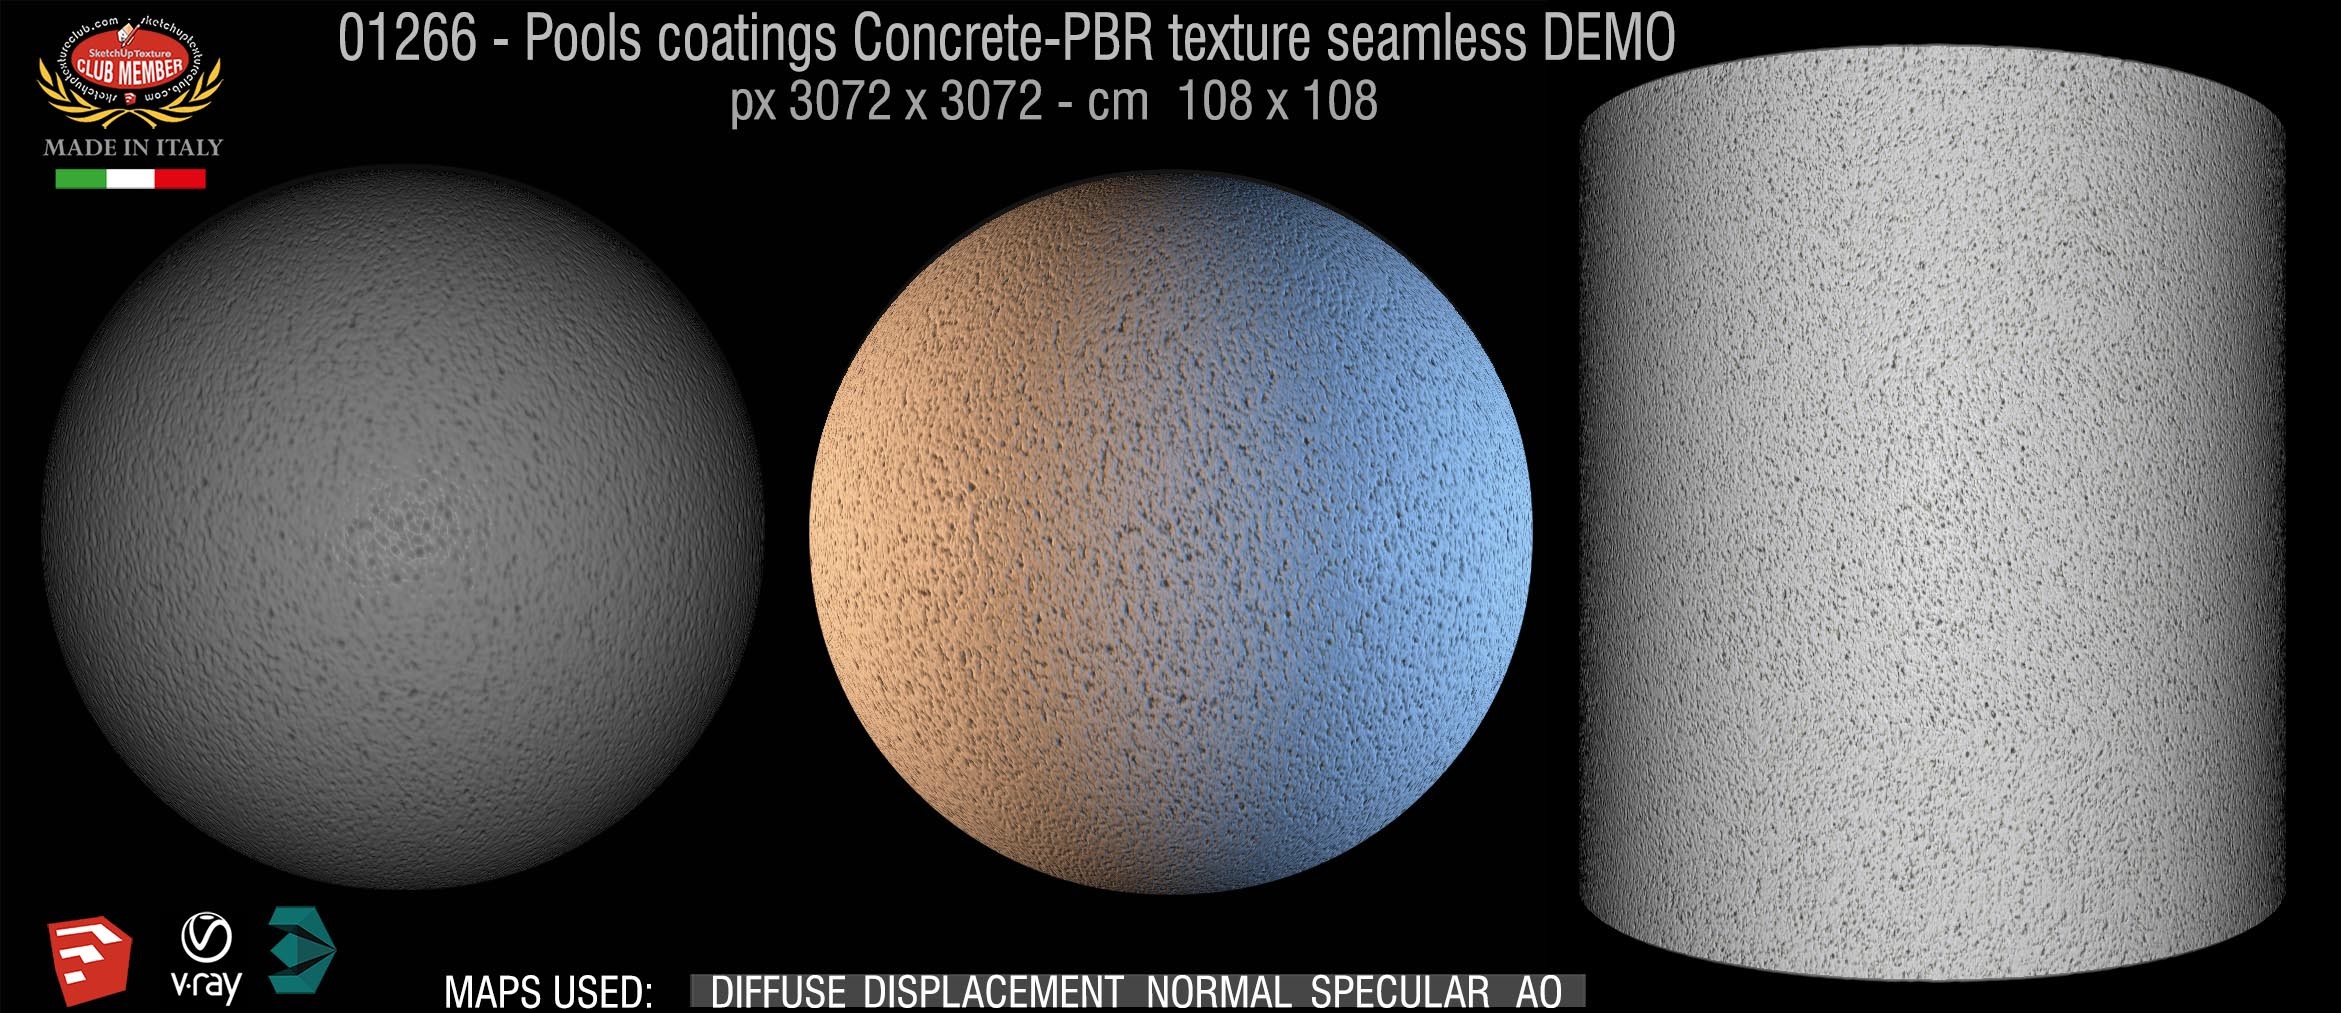 01266 Pools coatings Concrete-PBR texture seamless DEMO